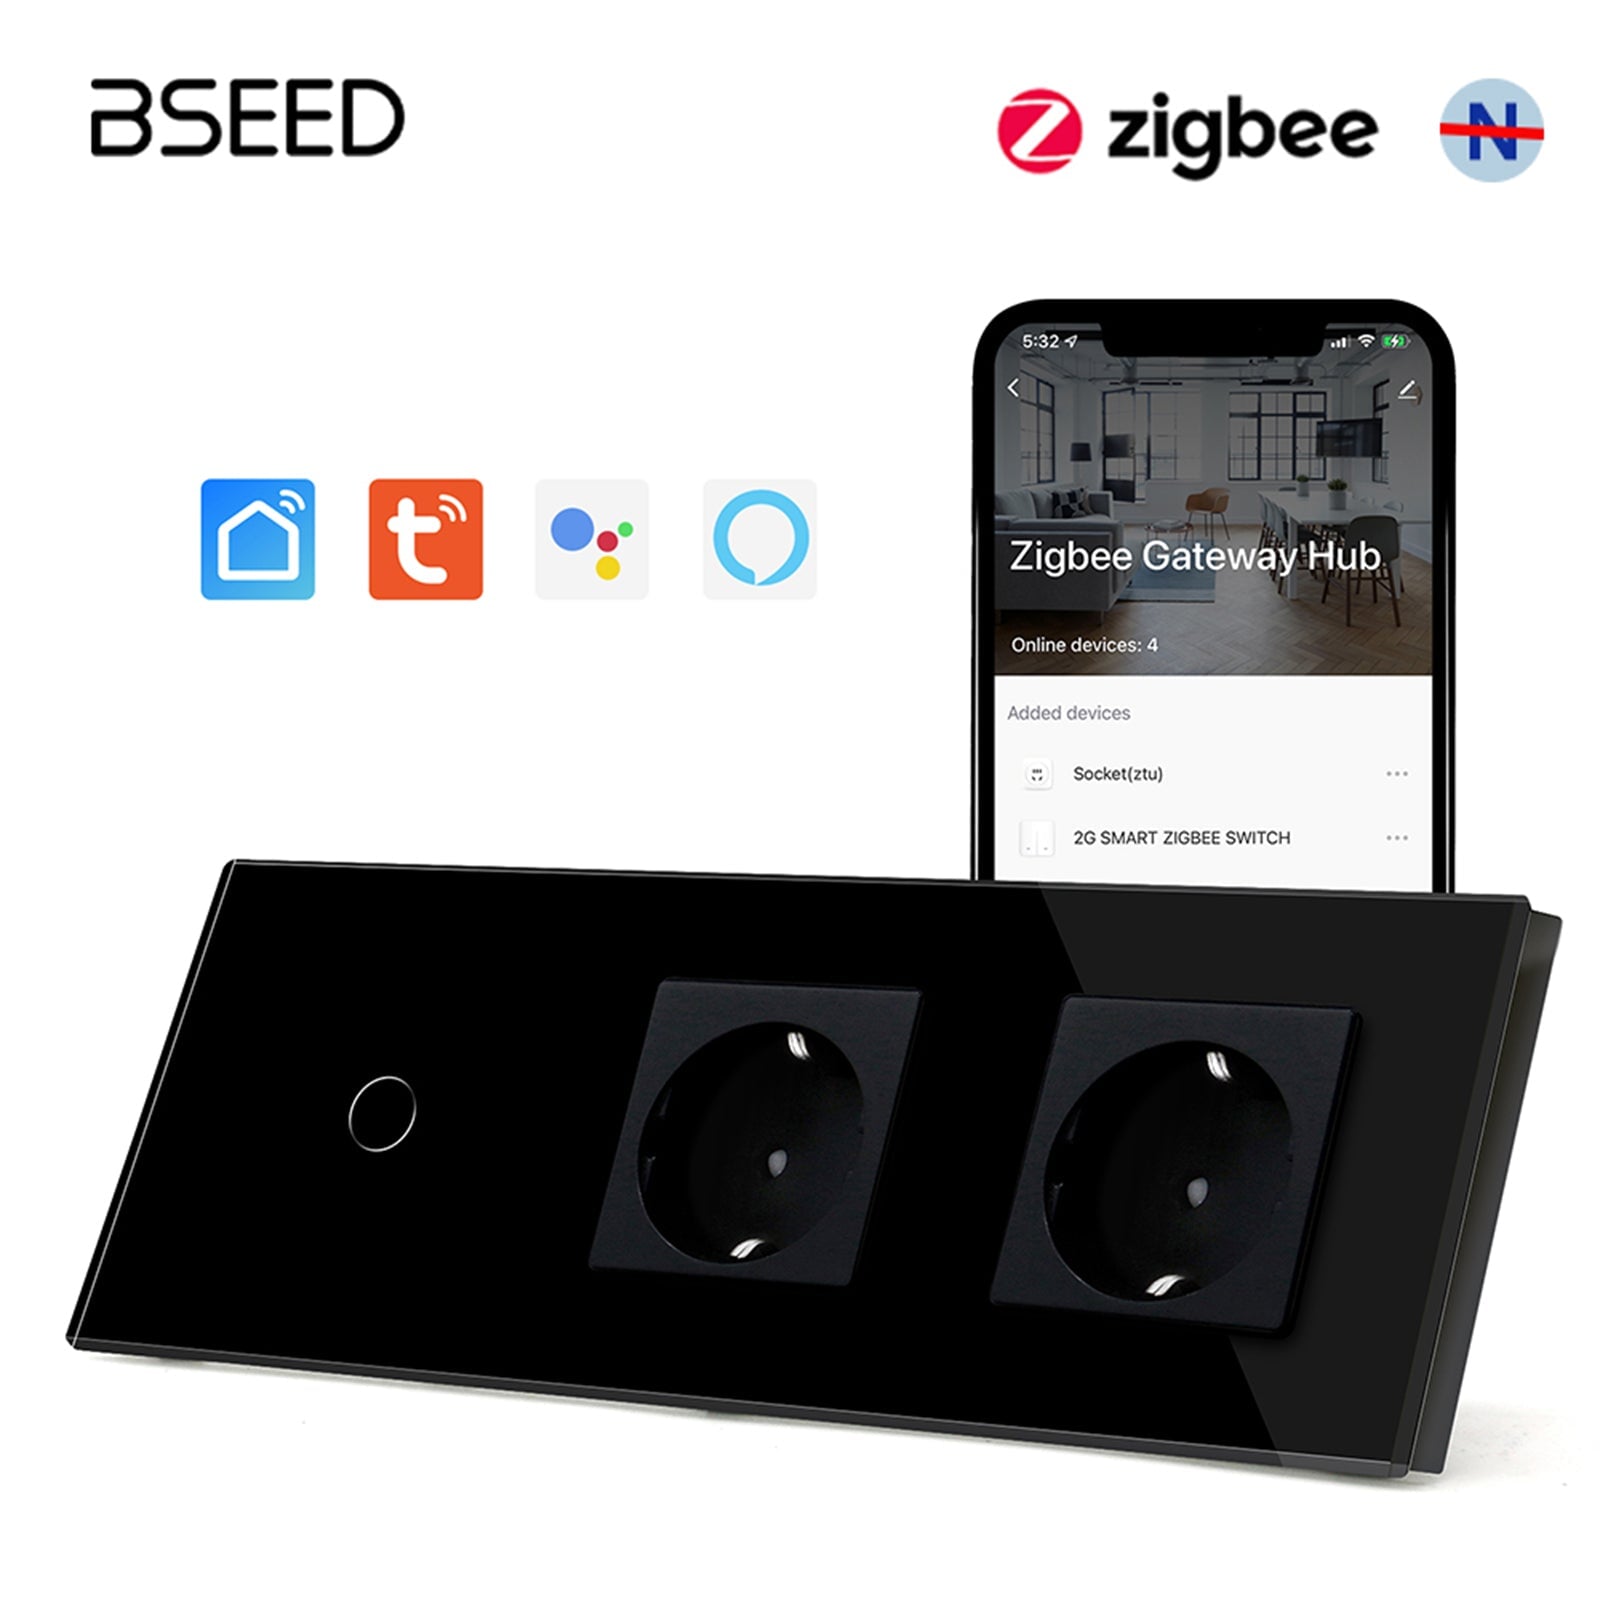 Bseed Zigbee Touch 1/2/3 Gang Light Switches Single Live Line Multi Control With Double EU Standard Not Smart Wall Sockets Light Switches Bseedswitch Black 1Gang 